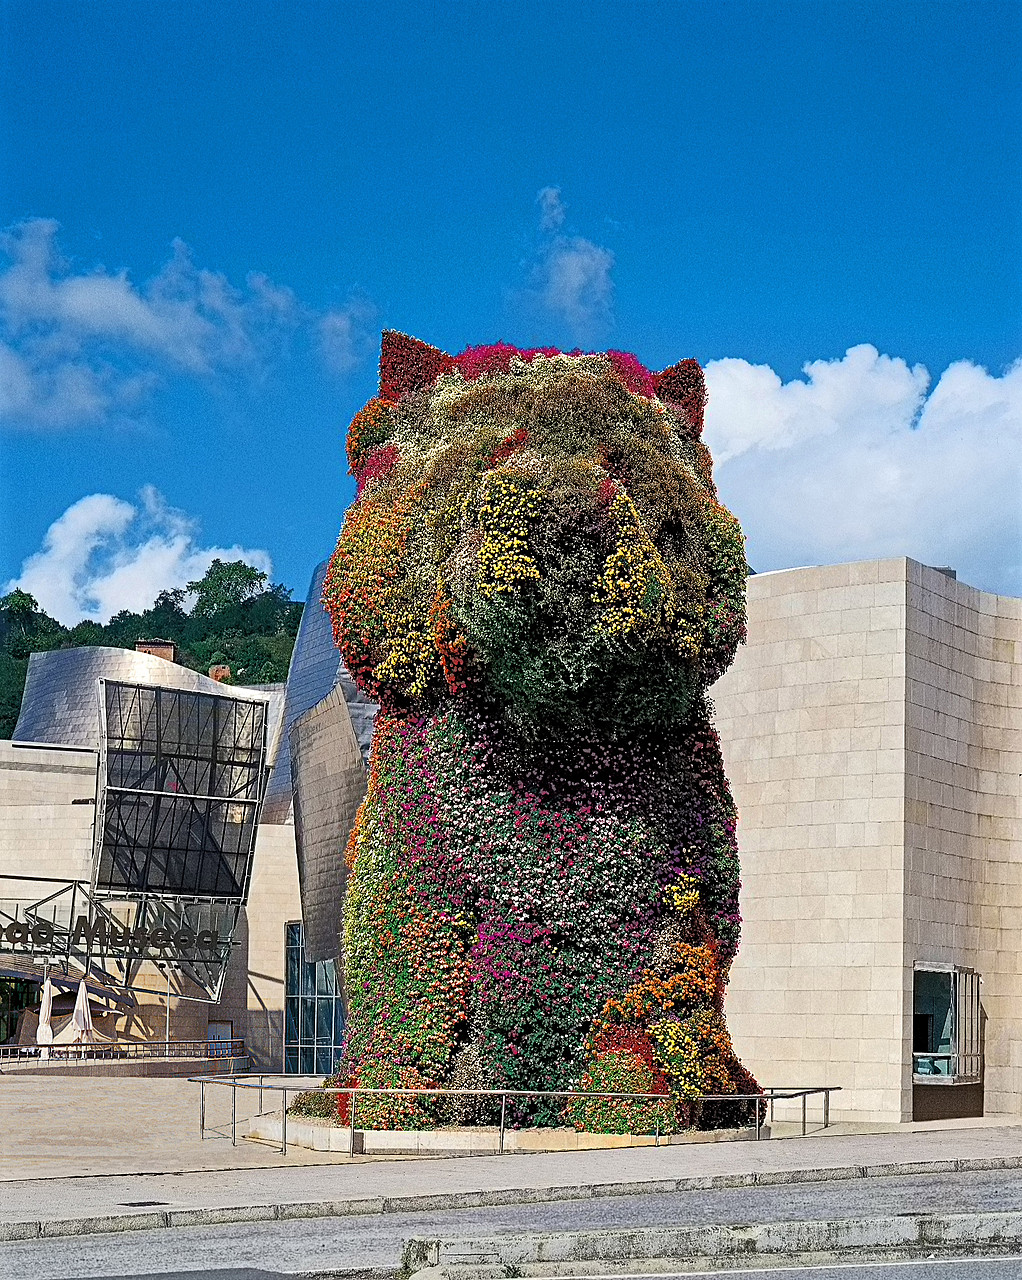 Why Did Jeff Koons Make a Giant Puppy?